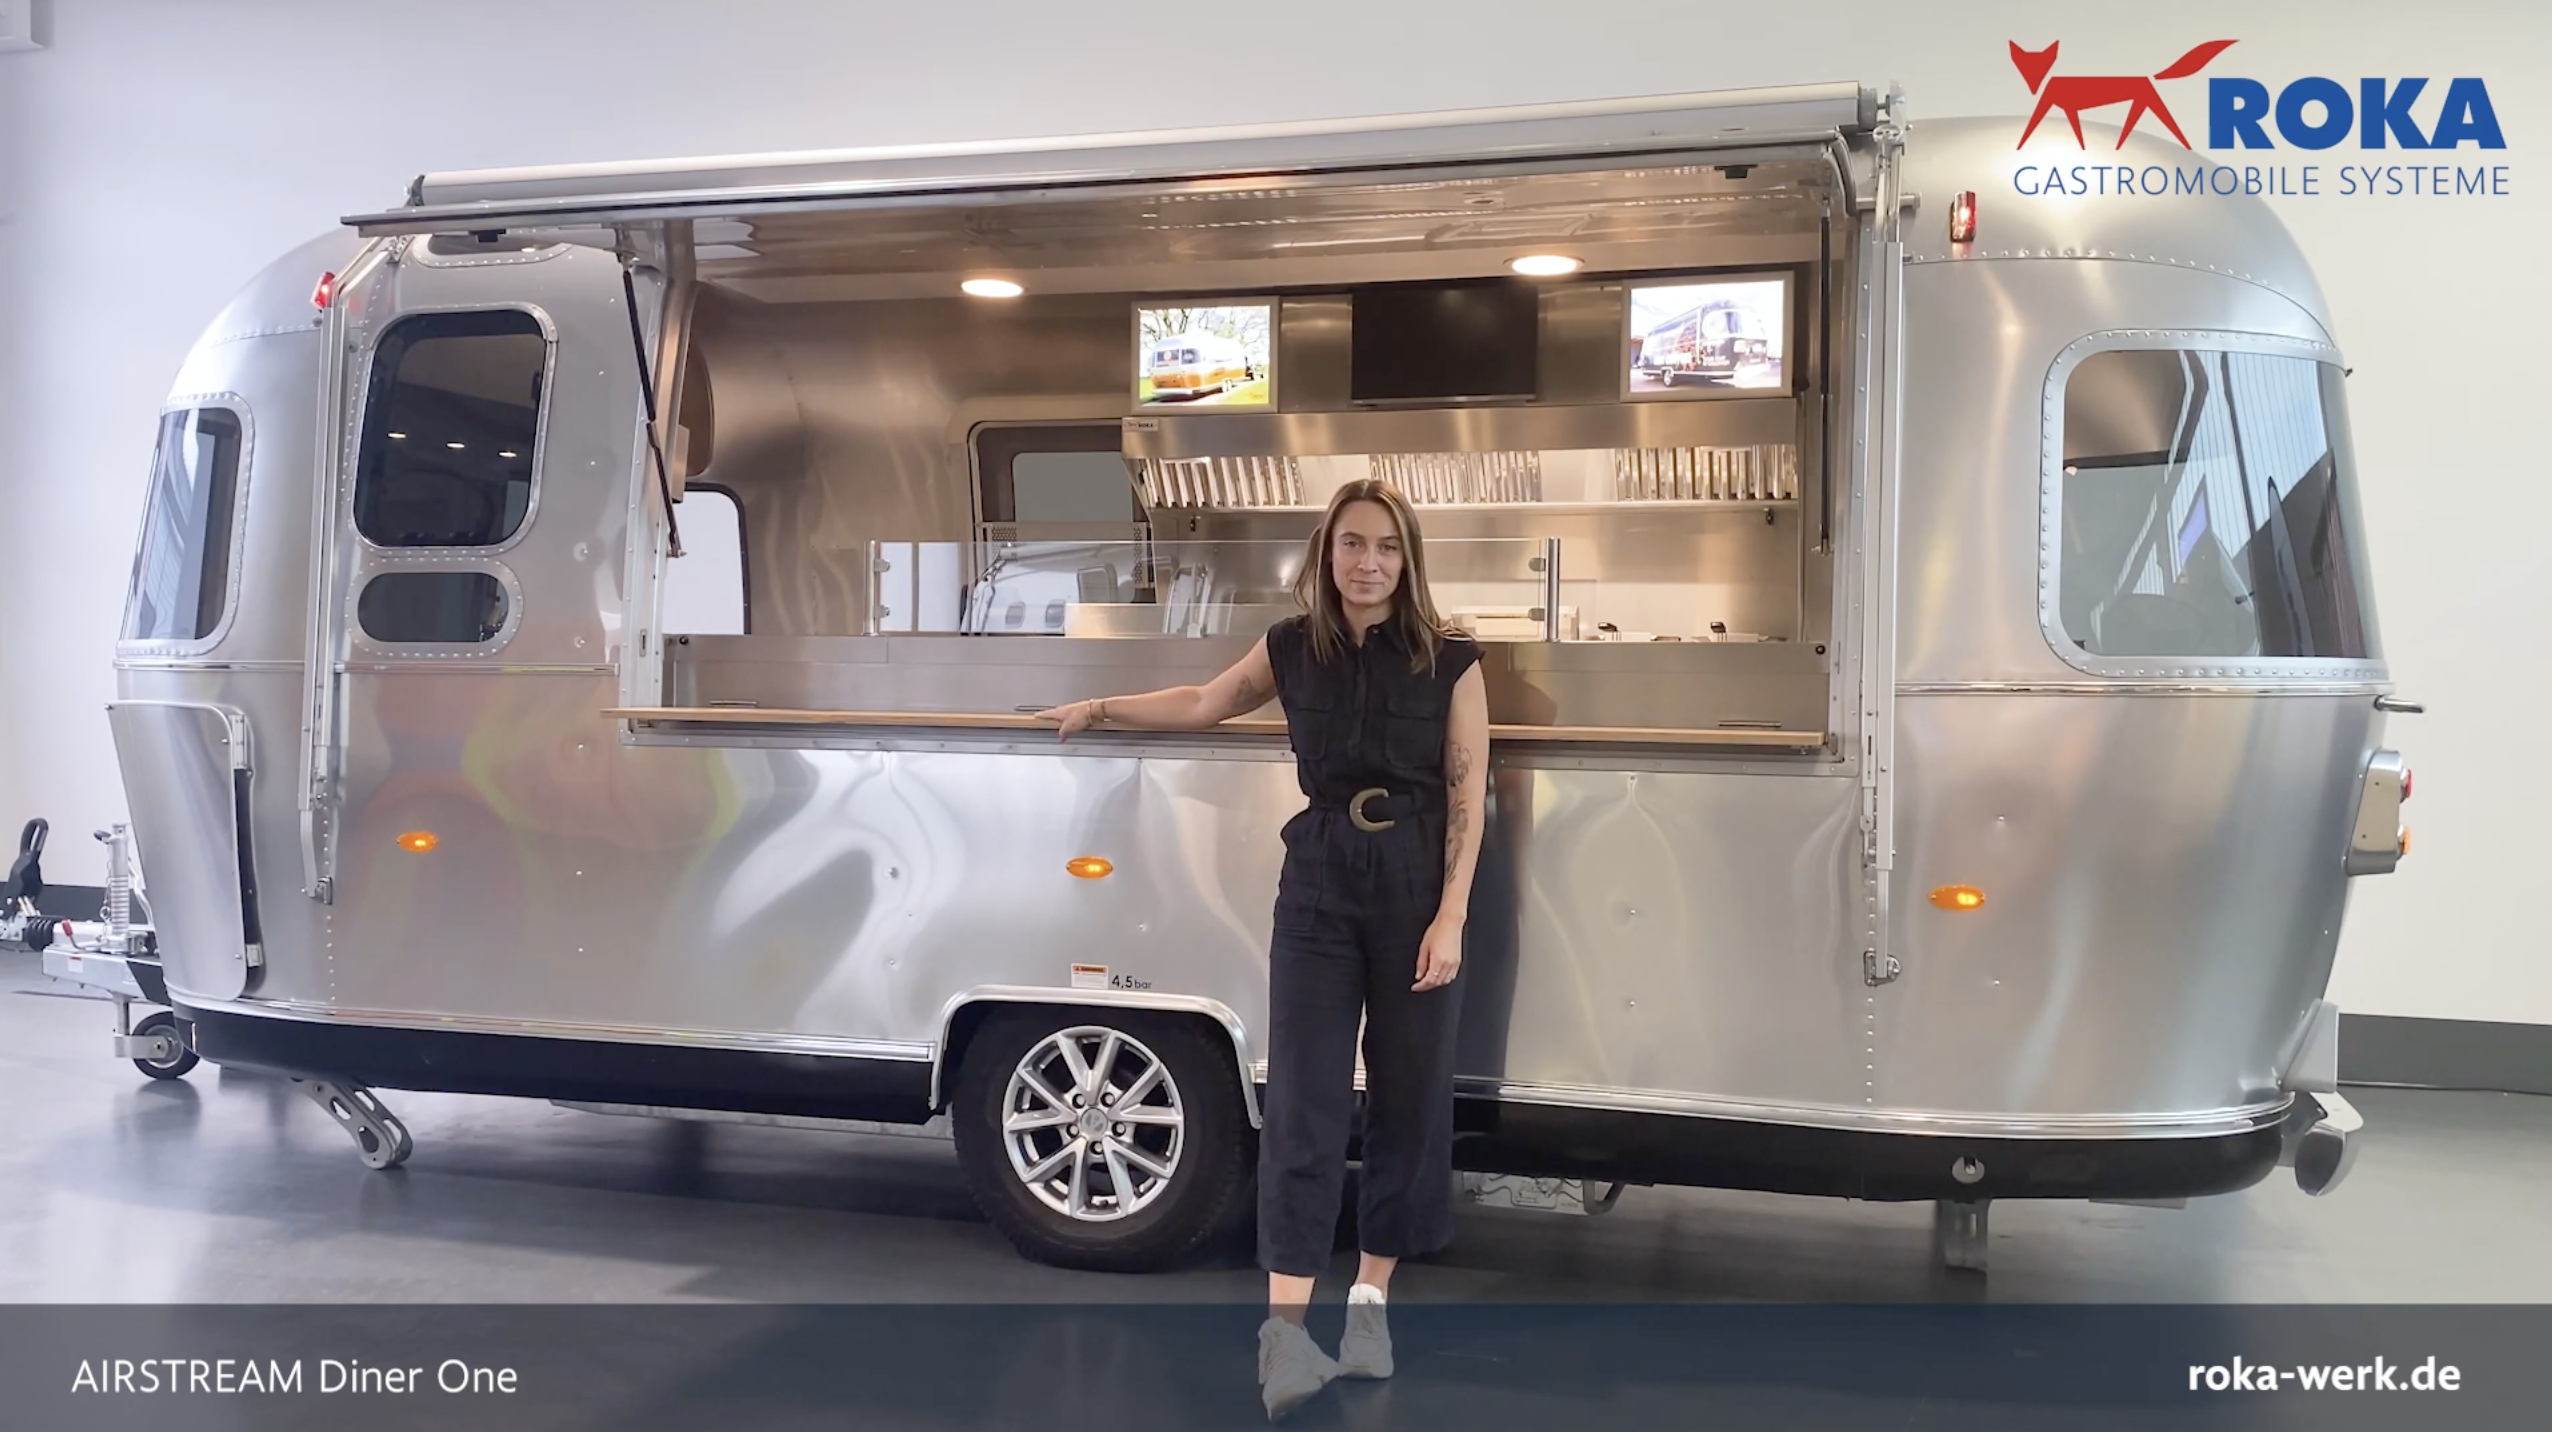 Video about the Airstream Diner One sales van